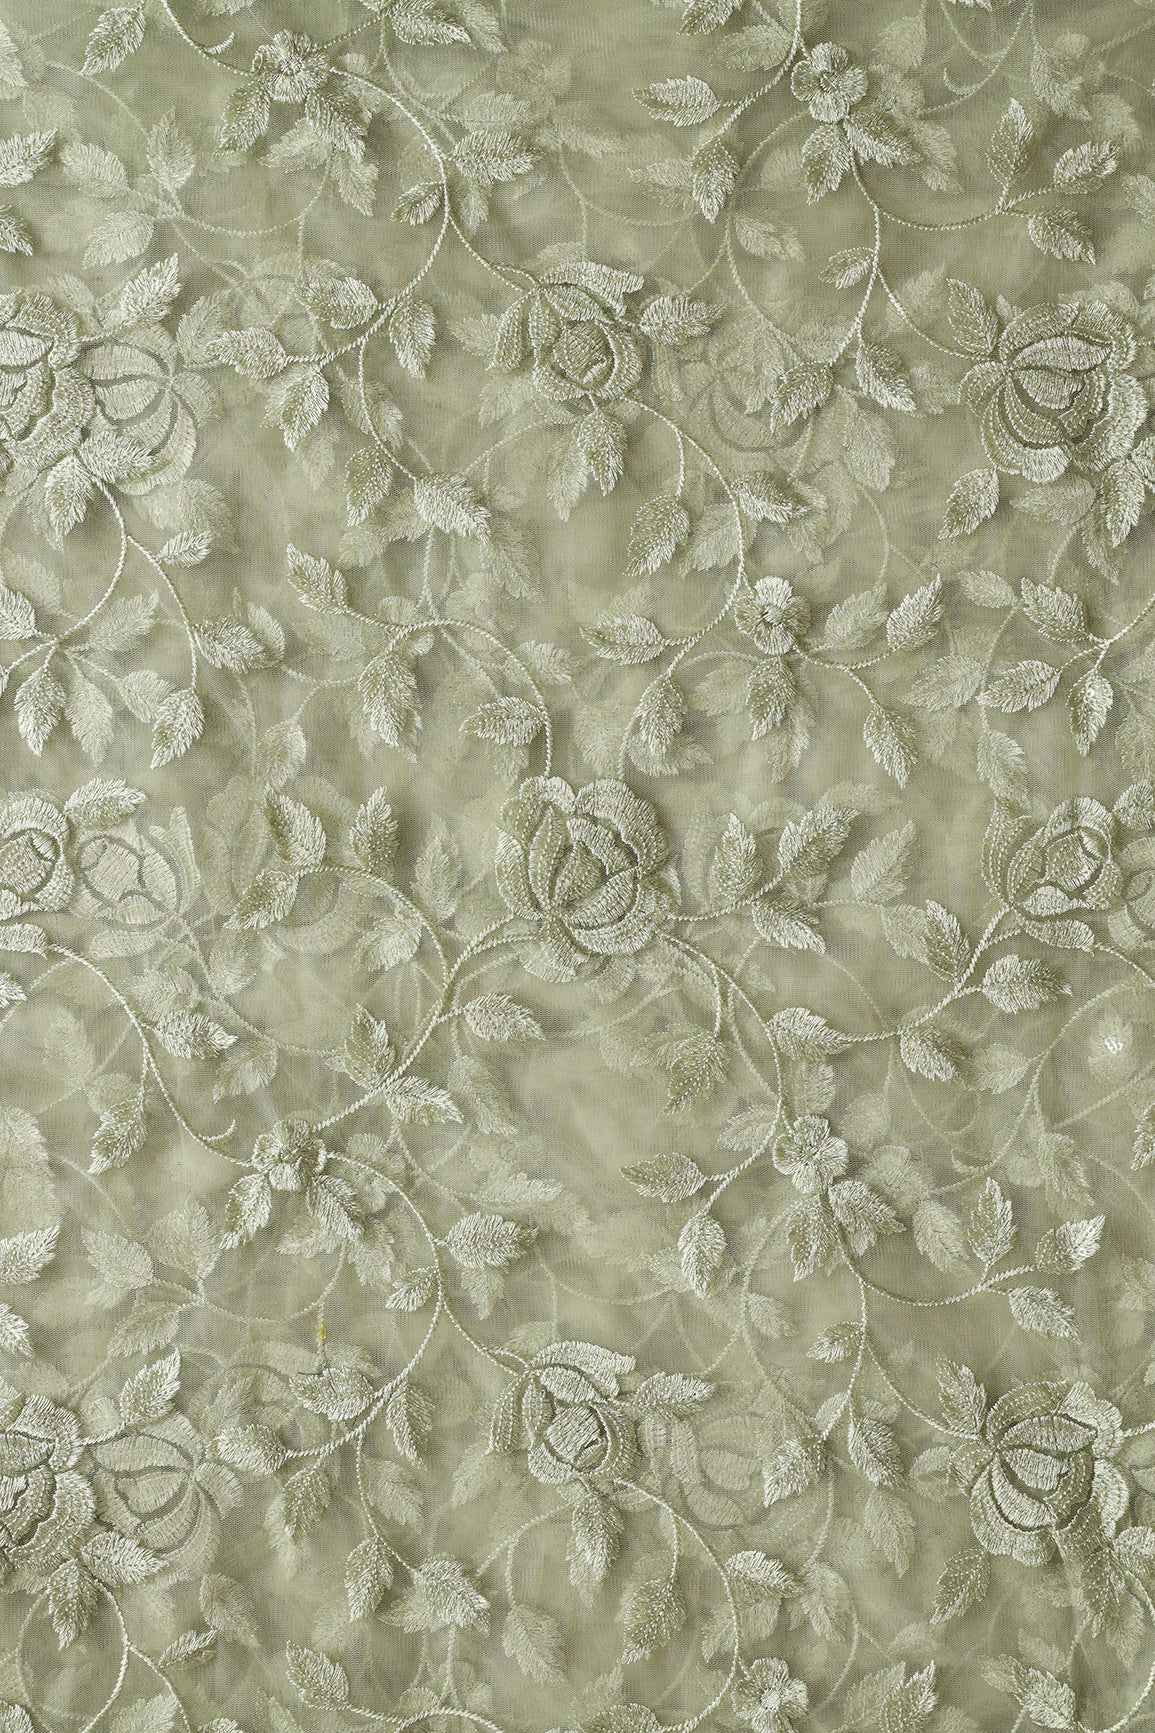 Gorgeous Olive Thread With Sequins Floral Leafy Embroidery On Olive Soft Net Fabric